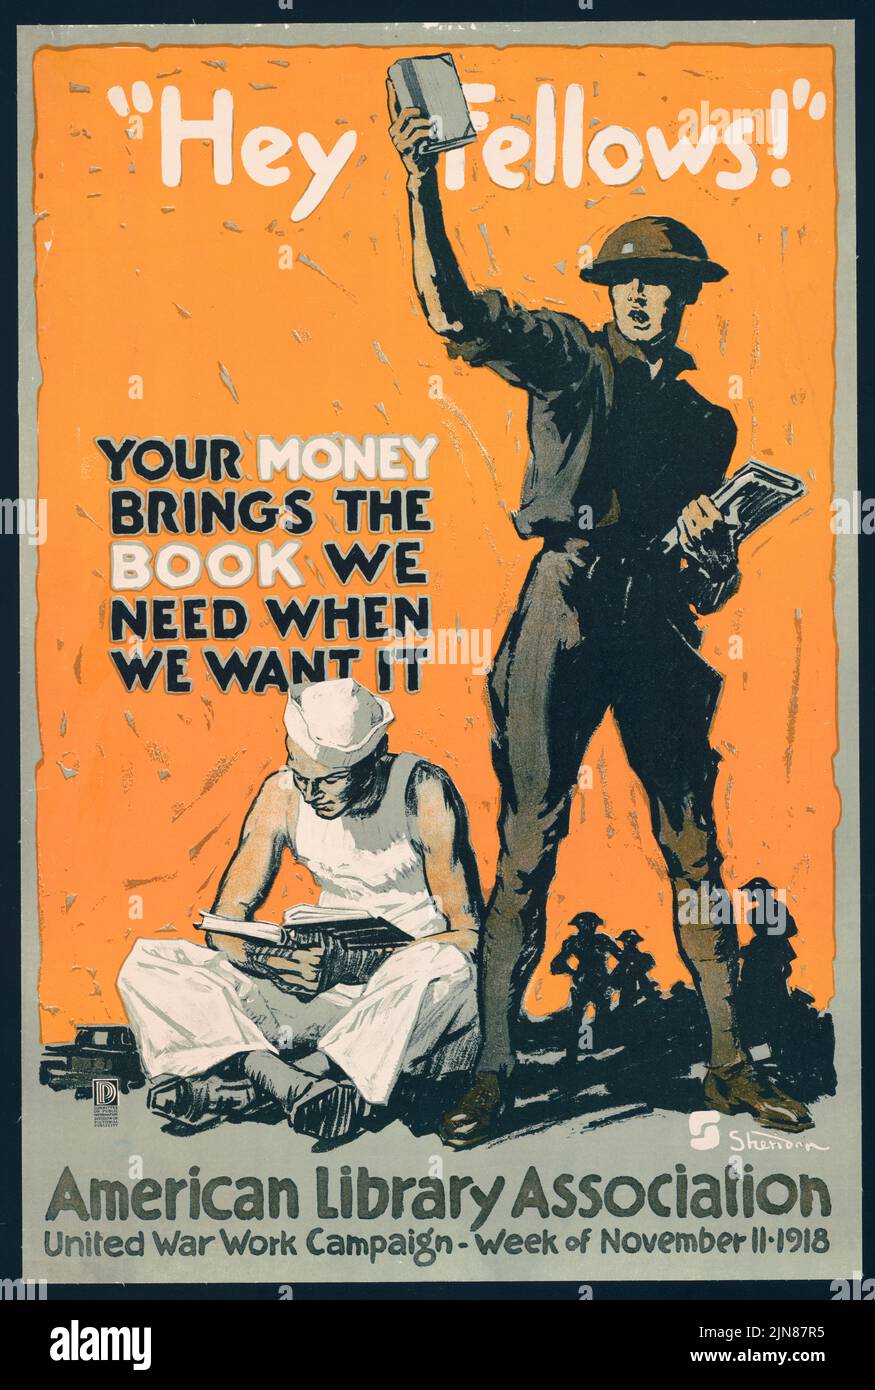 ‘Hey fellows!’ Your money brings the book we need when we want it, American Library Association, United War Work Campaign, November 11 (1918) American World War I era poster by John Sheridan Stock Photo